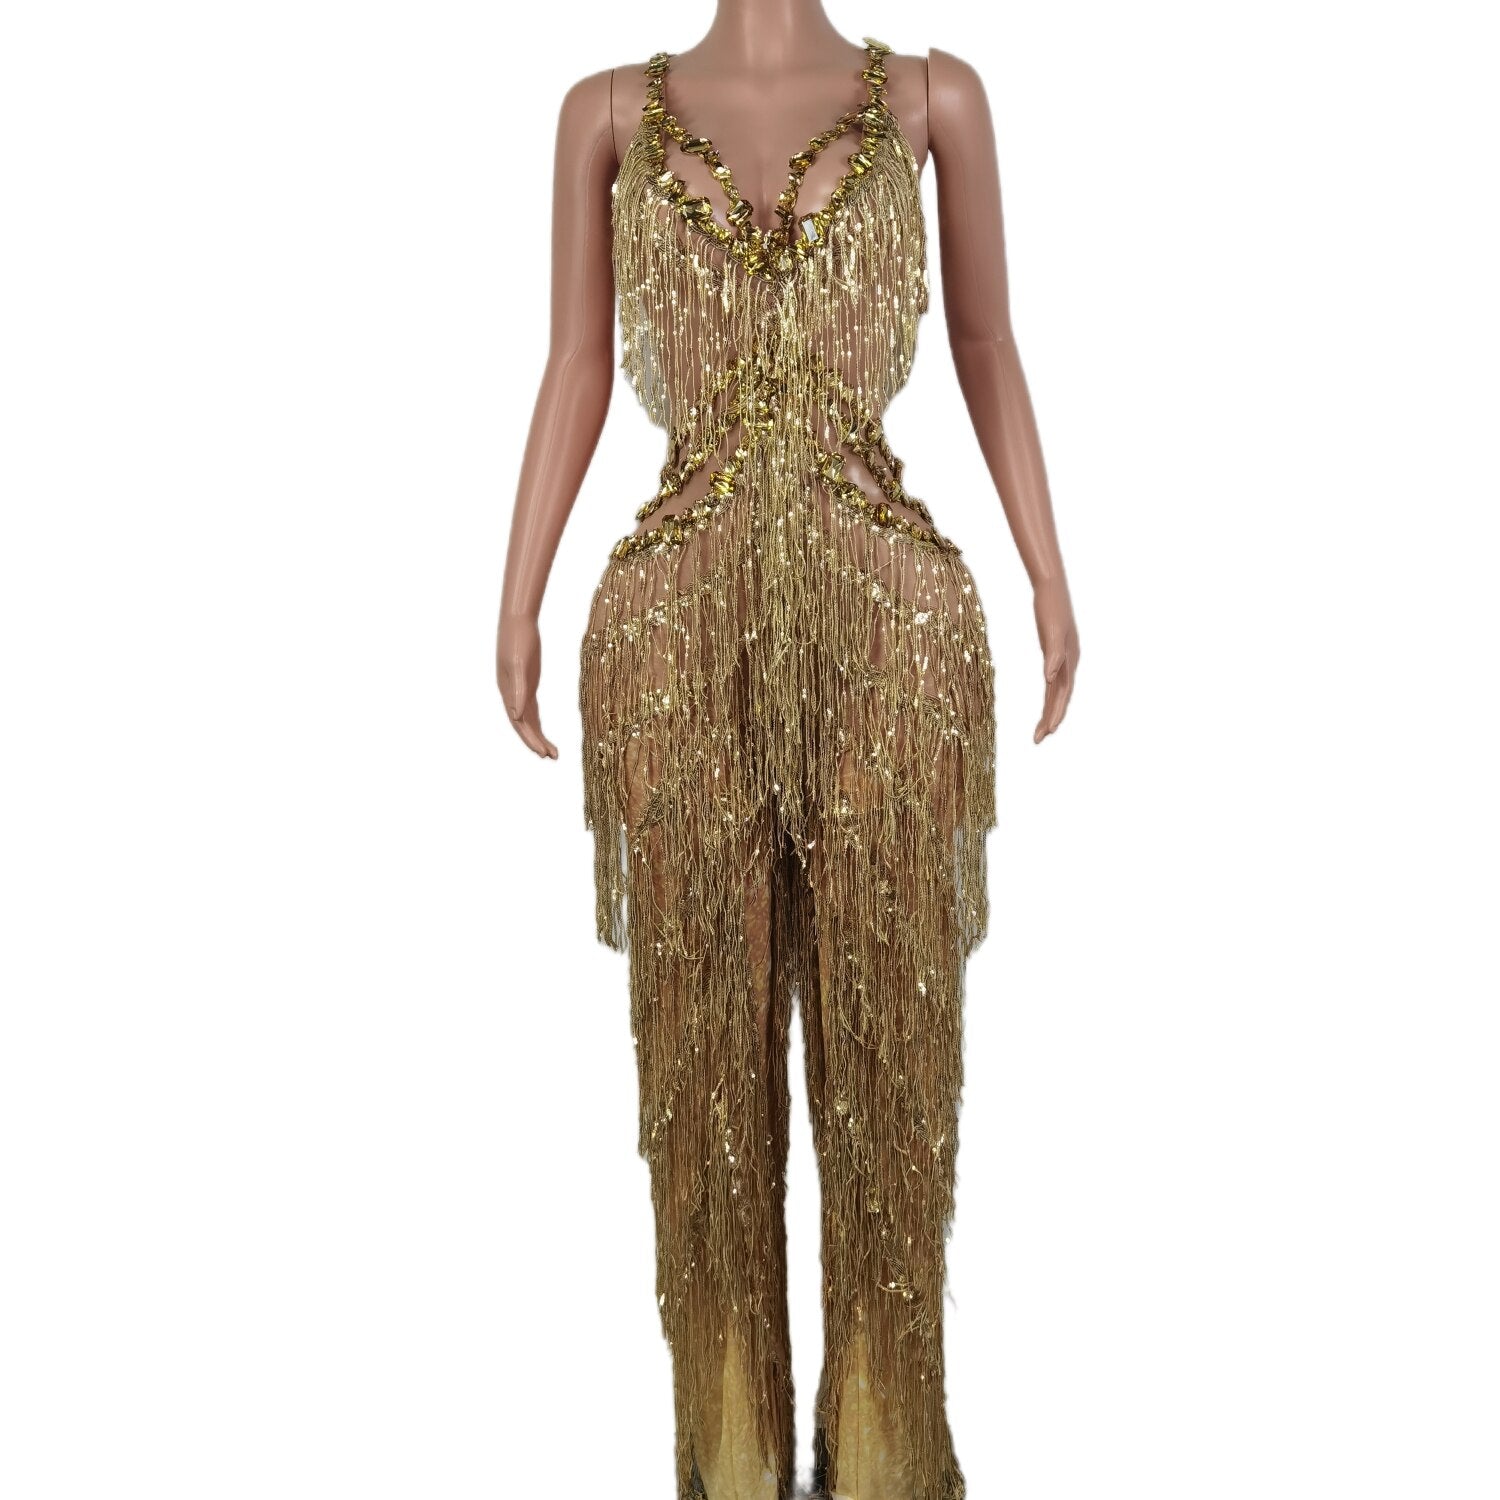 Women Sleeveless Jumpsuit Sparkly Gold Sequins Rhinestones Rompers Outfit